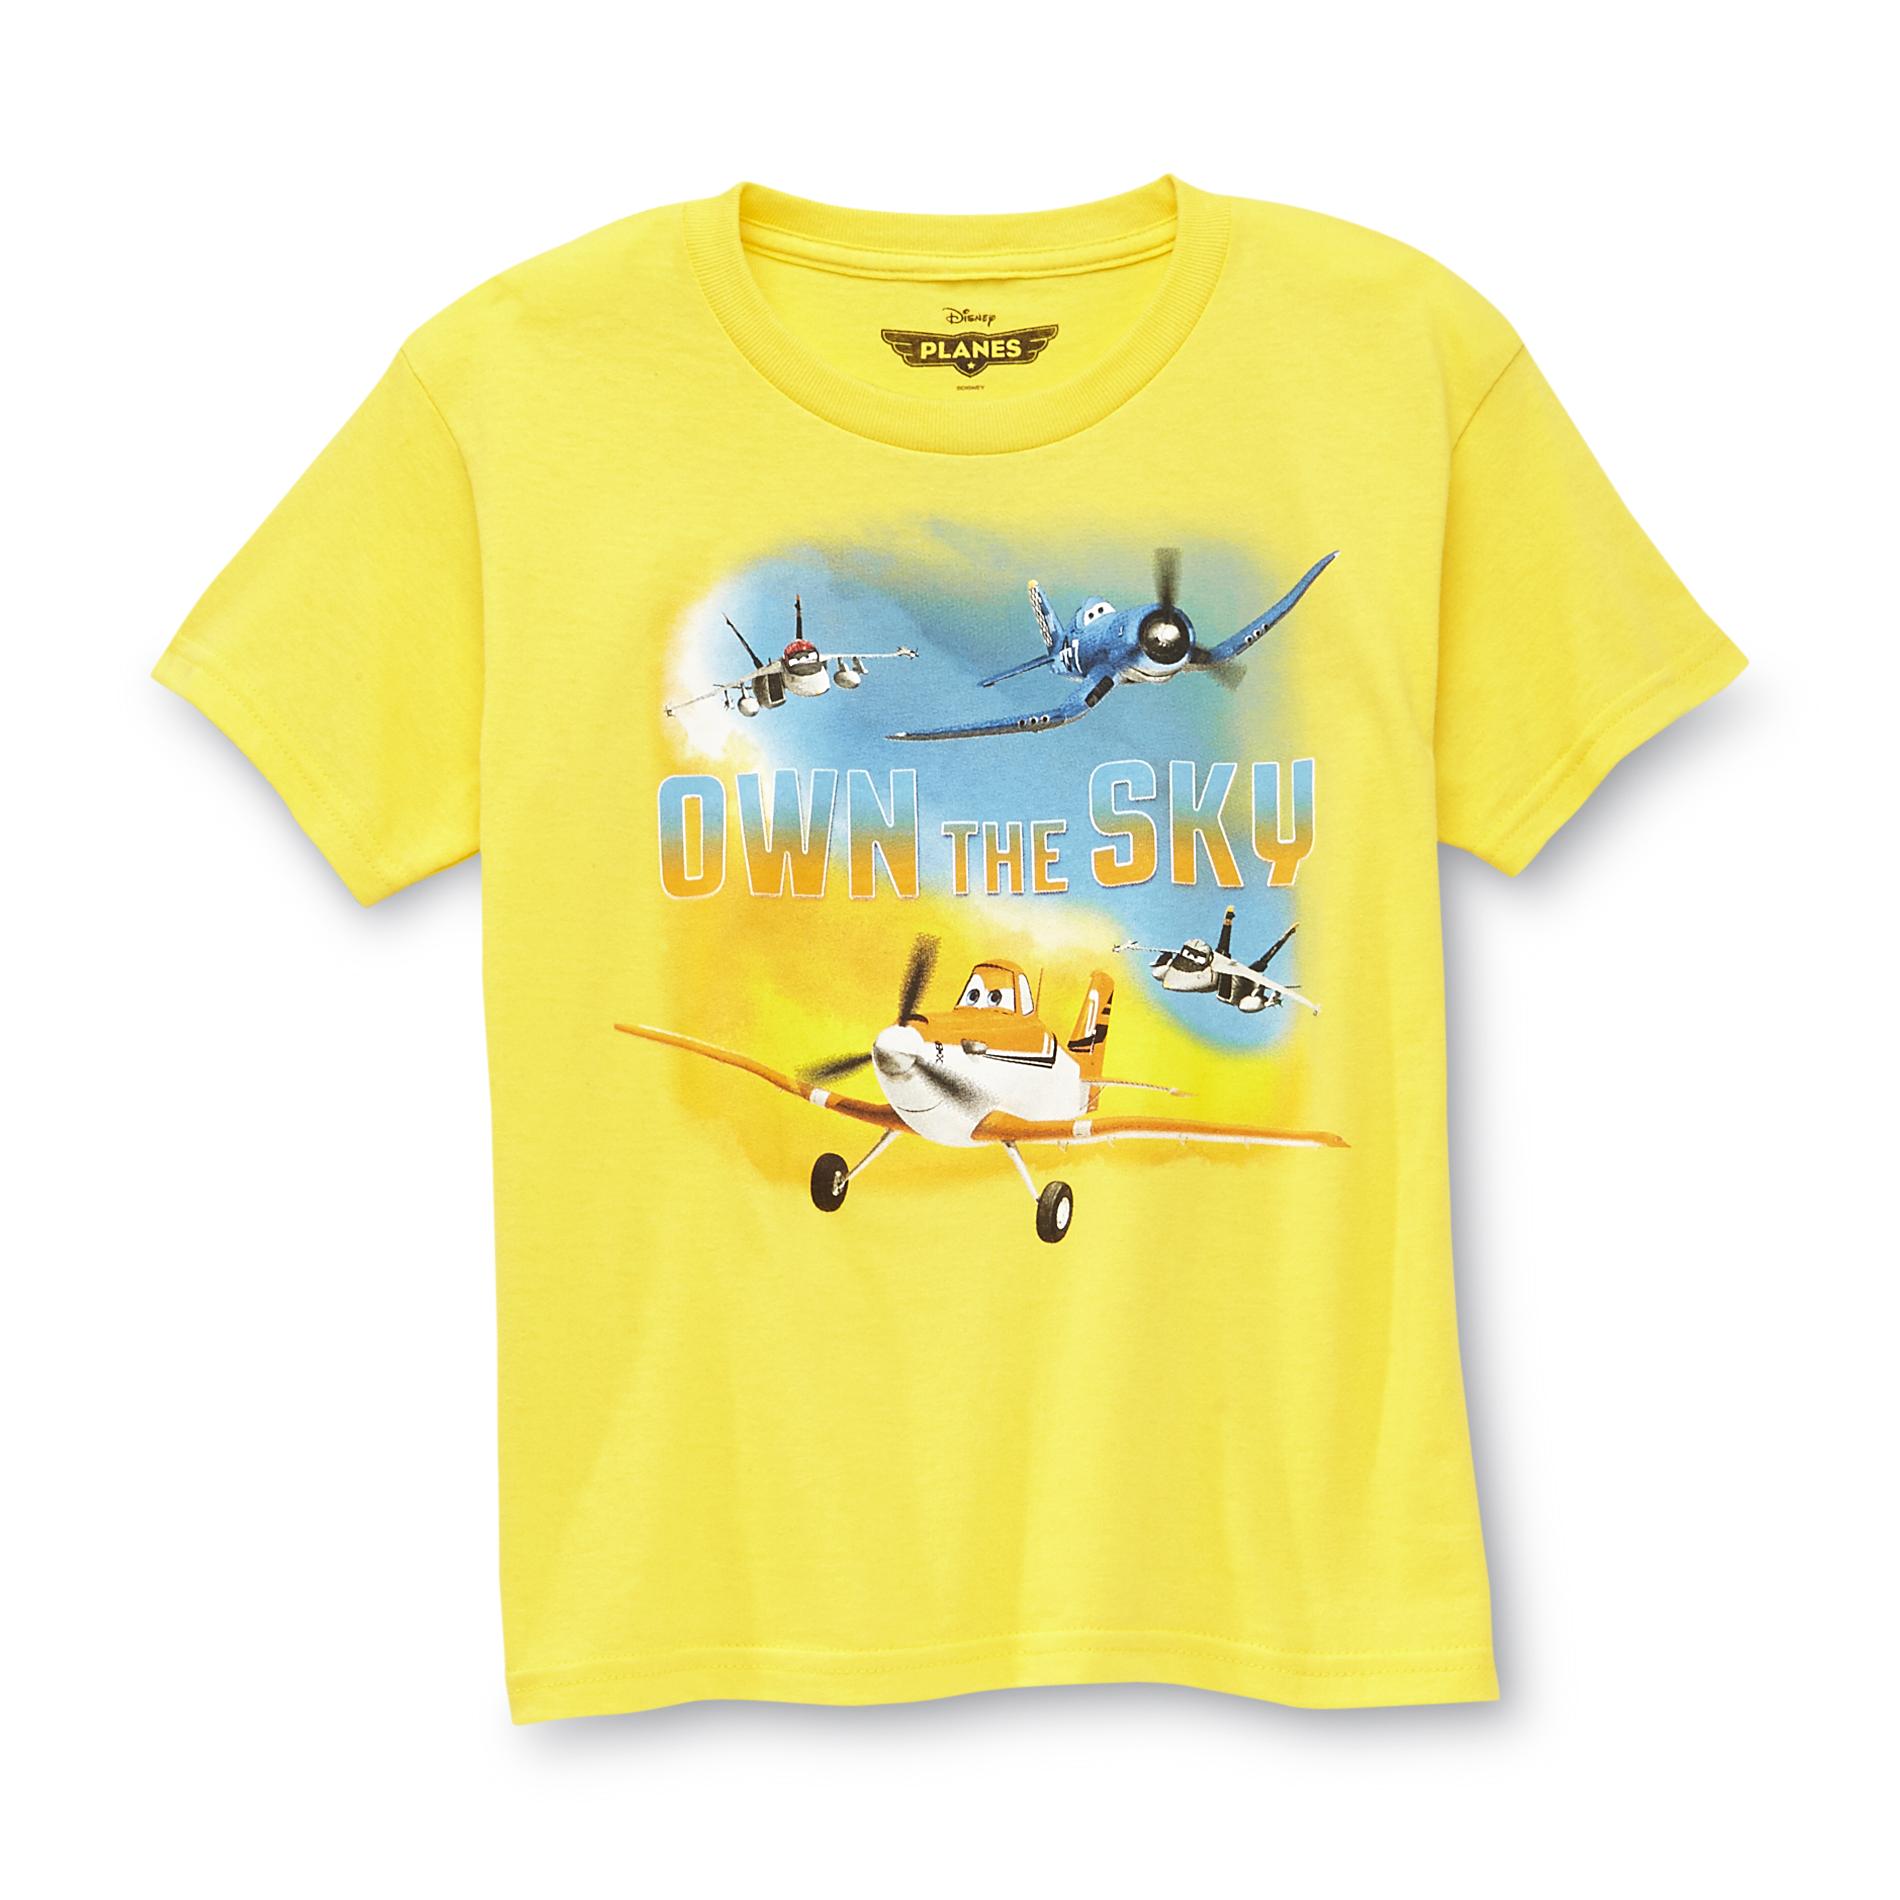 Disney Planes Boy's Graphic T-Shirt - Own The Sky